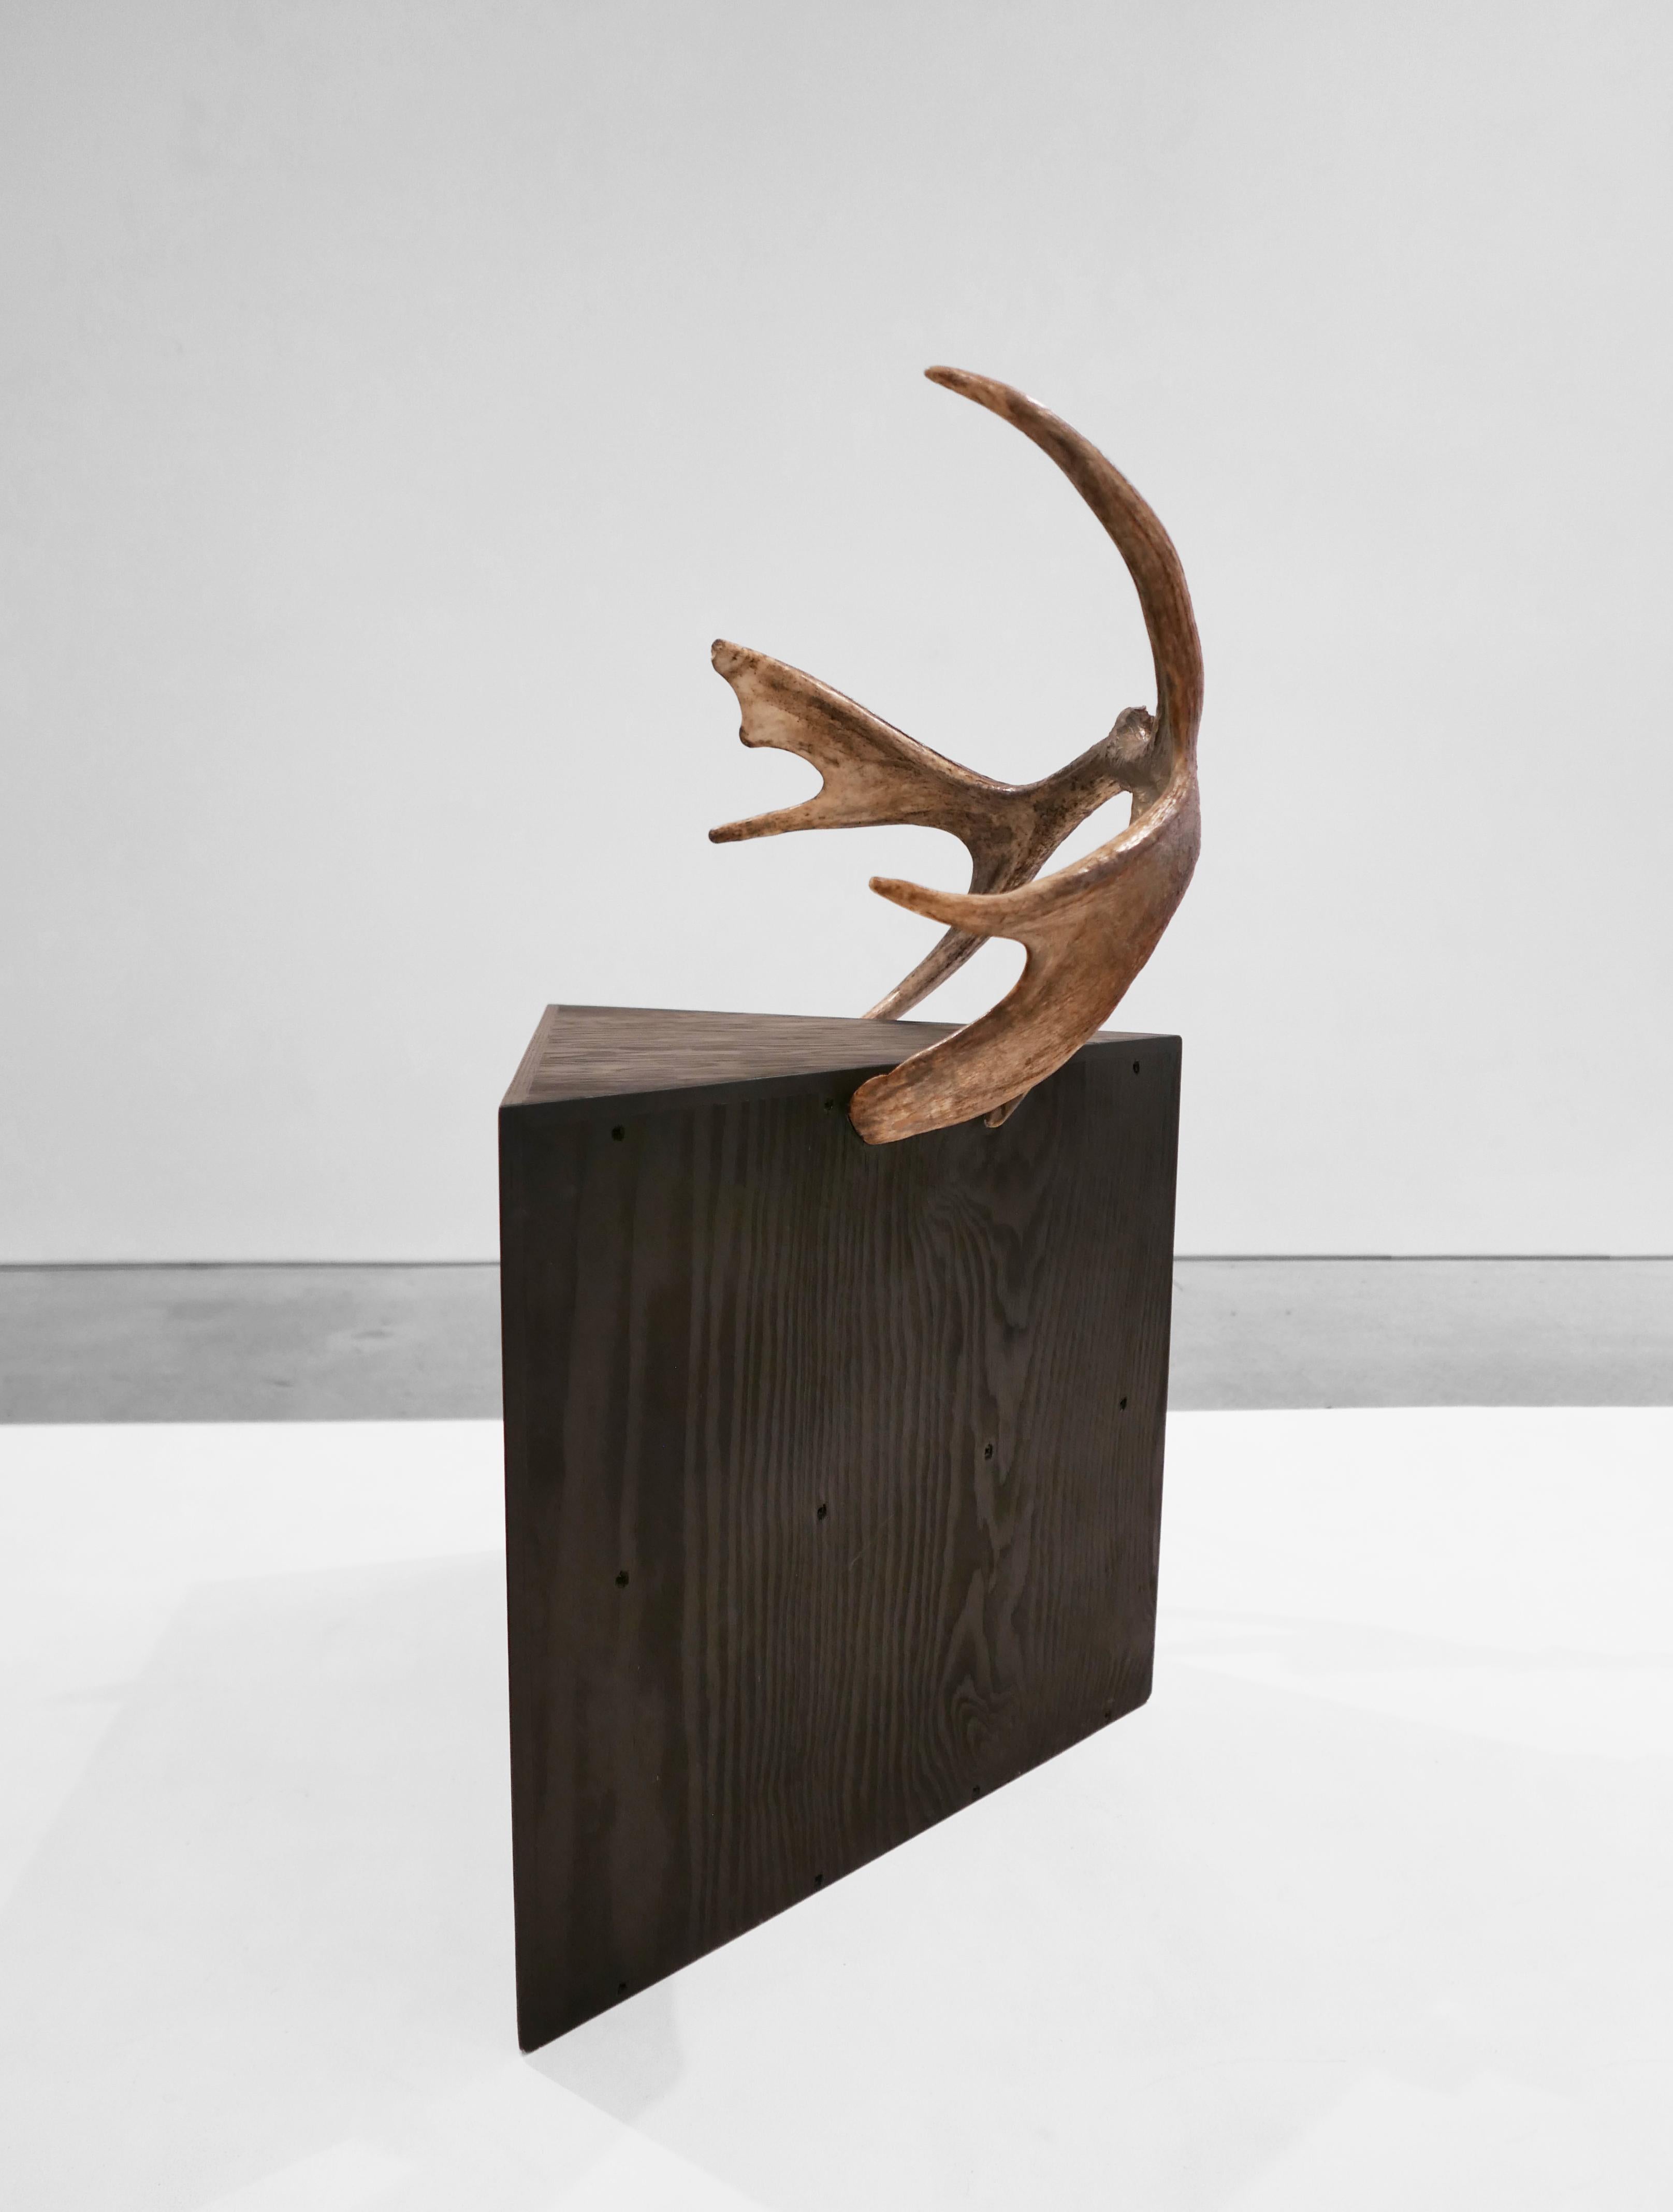 Rick Owens
Stag stool, 2009
Ebonised plywood, antlers
Measures: 34.5 H x 25 W x 17.75 D inches.